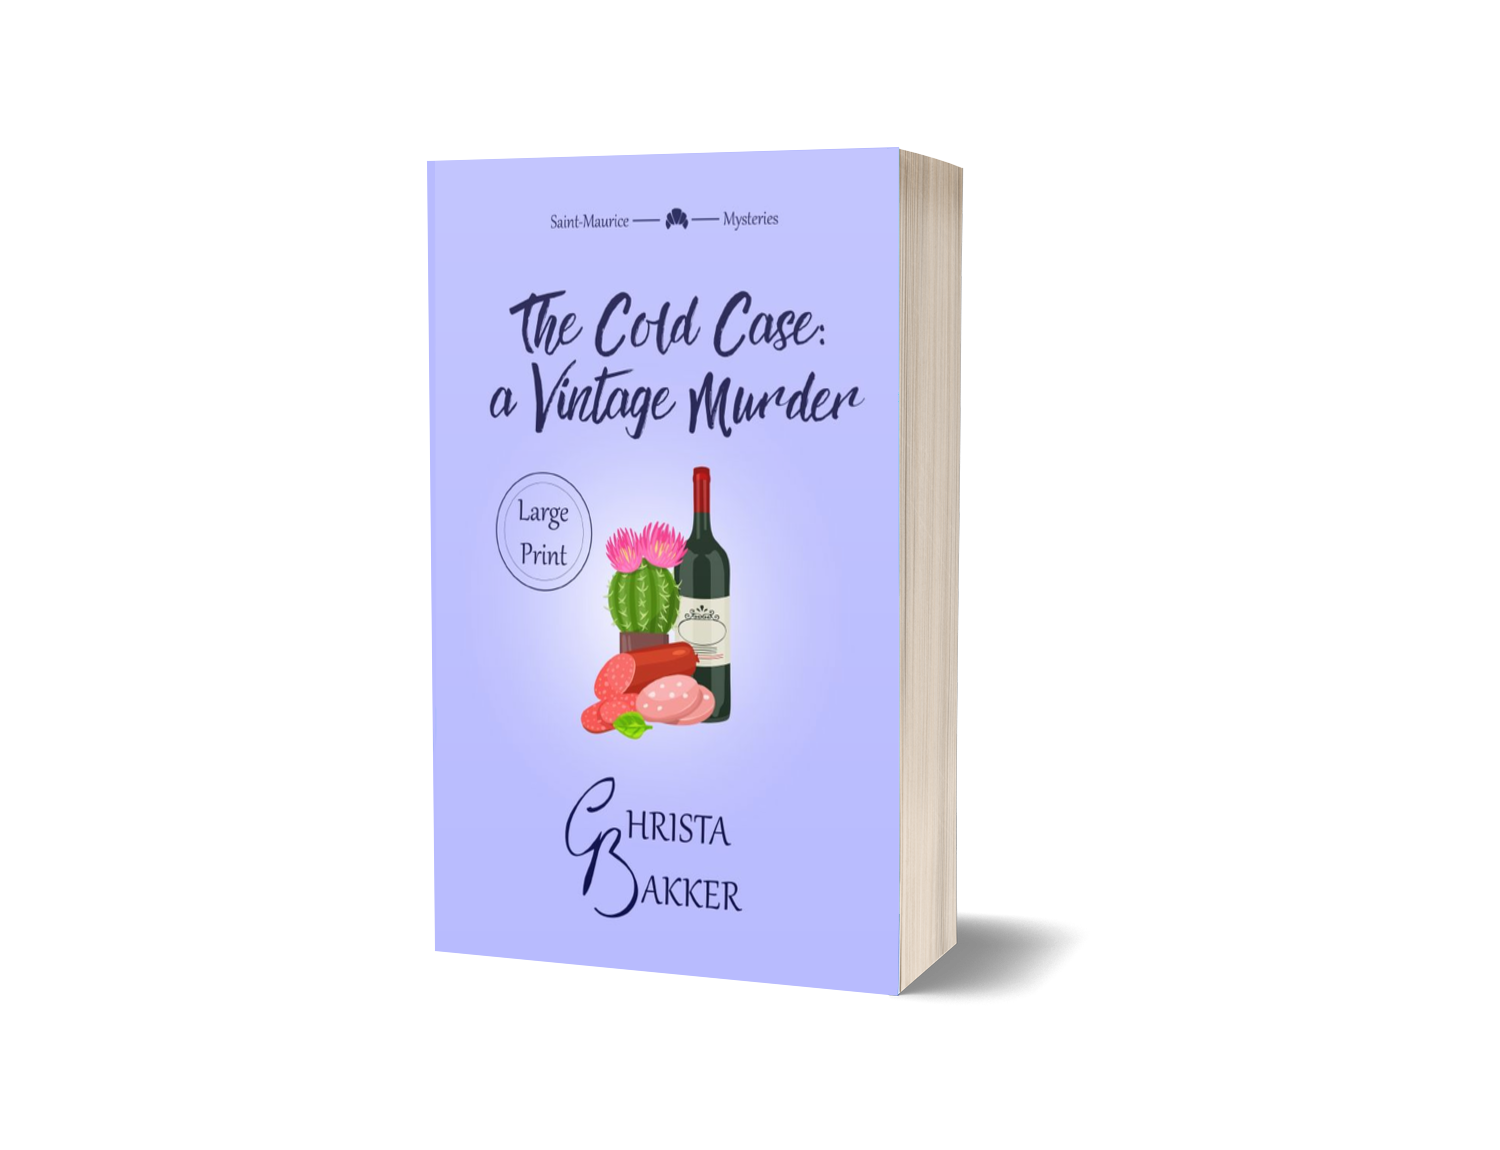 The cover for The Cold Case: a Vintage murder shows a bottle of wine accompanied by some cut-up sausage and... a cactus, for some reason, all on a lavender background.